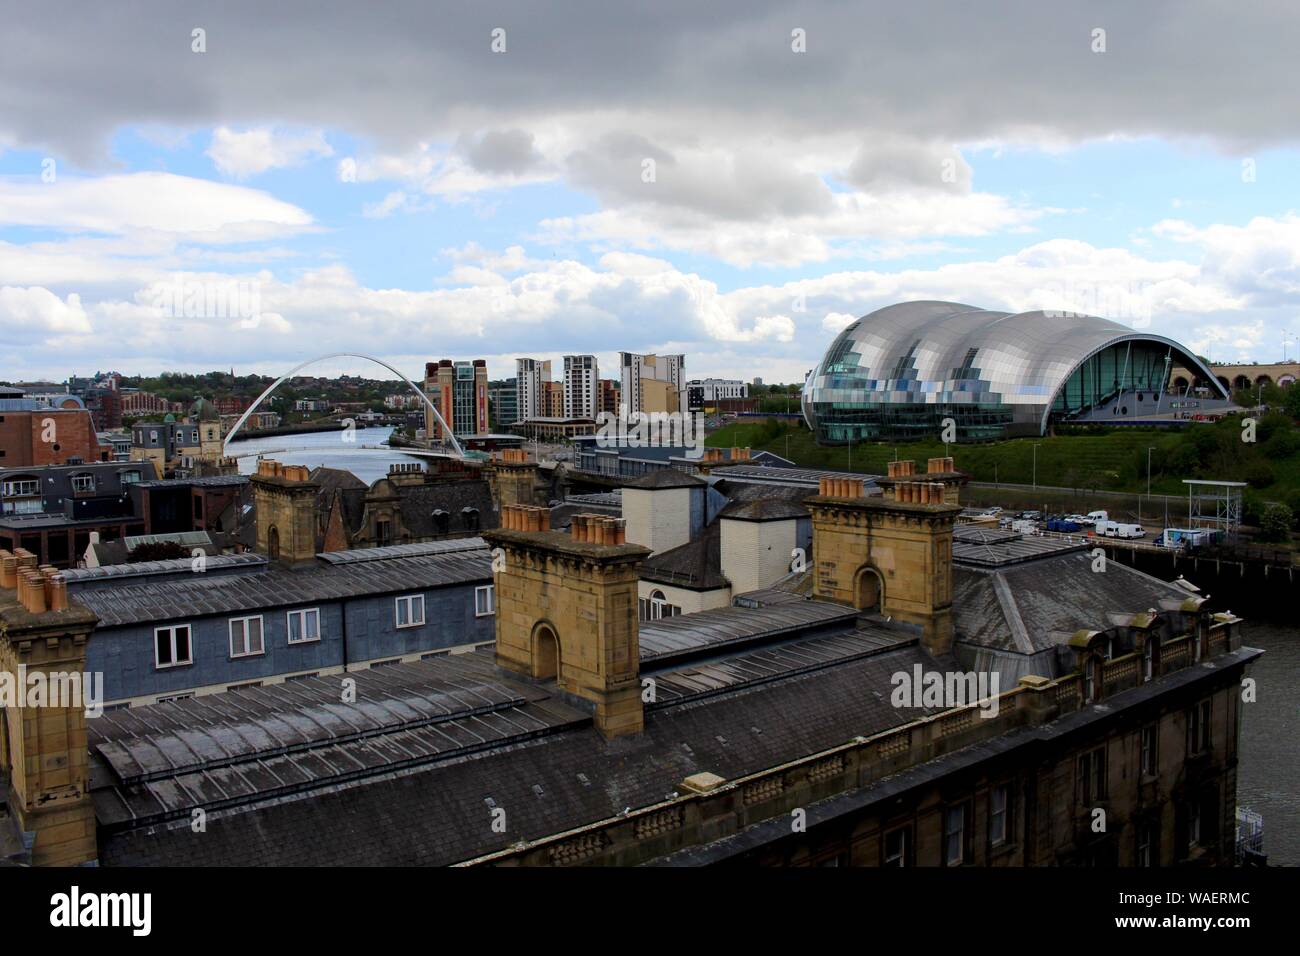 The Sage concert venue int the distance overlooking building roof tops, and cloudy  blue sky, in Gateshead, New castle upon tyne Stock Photo